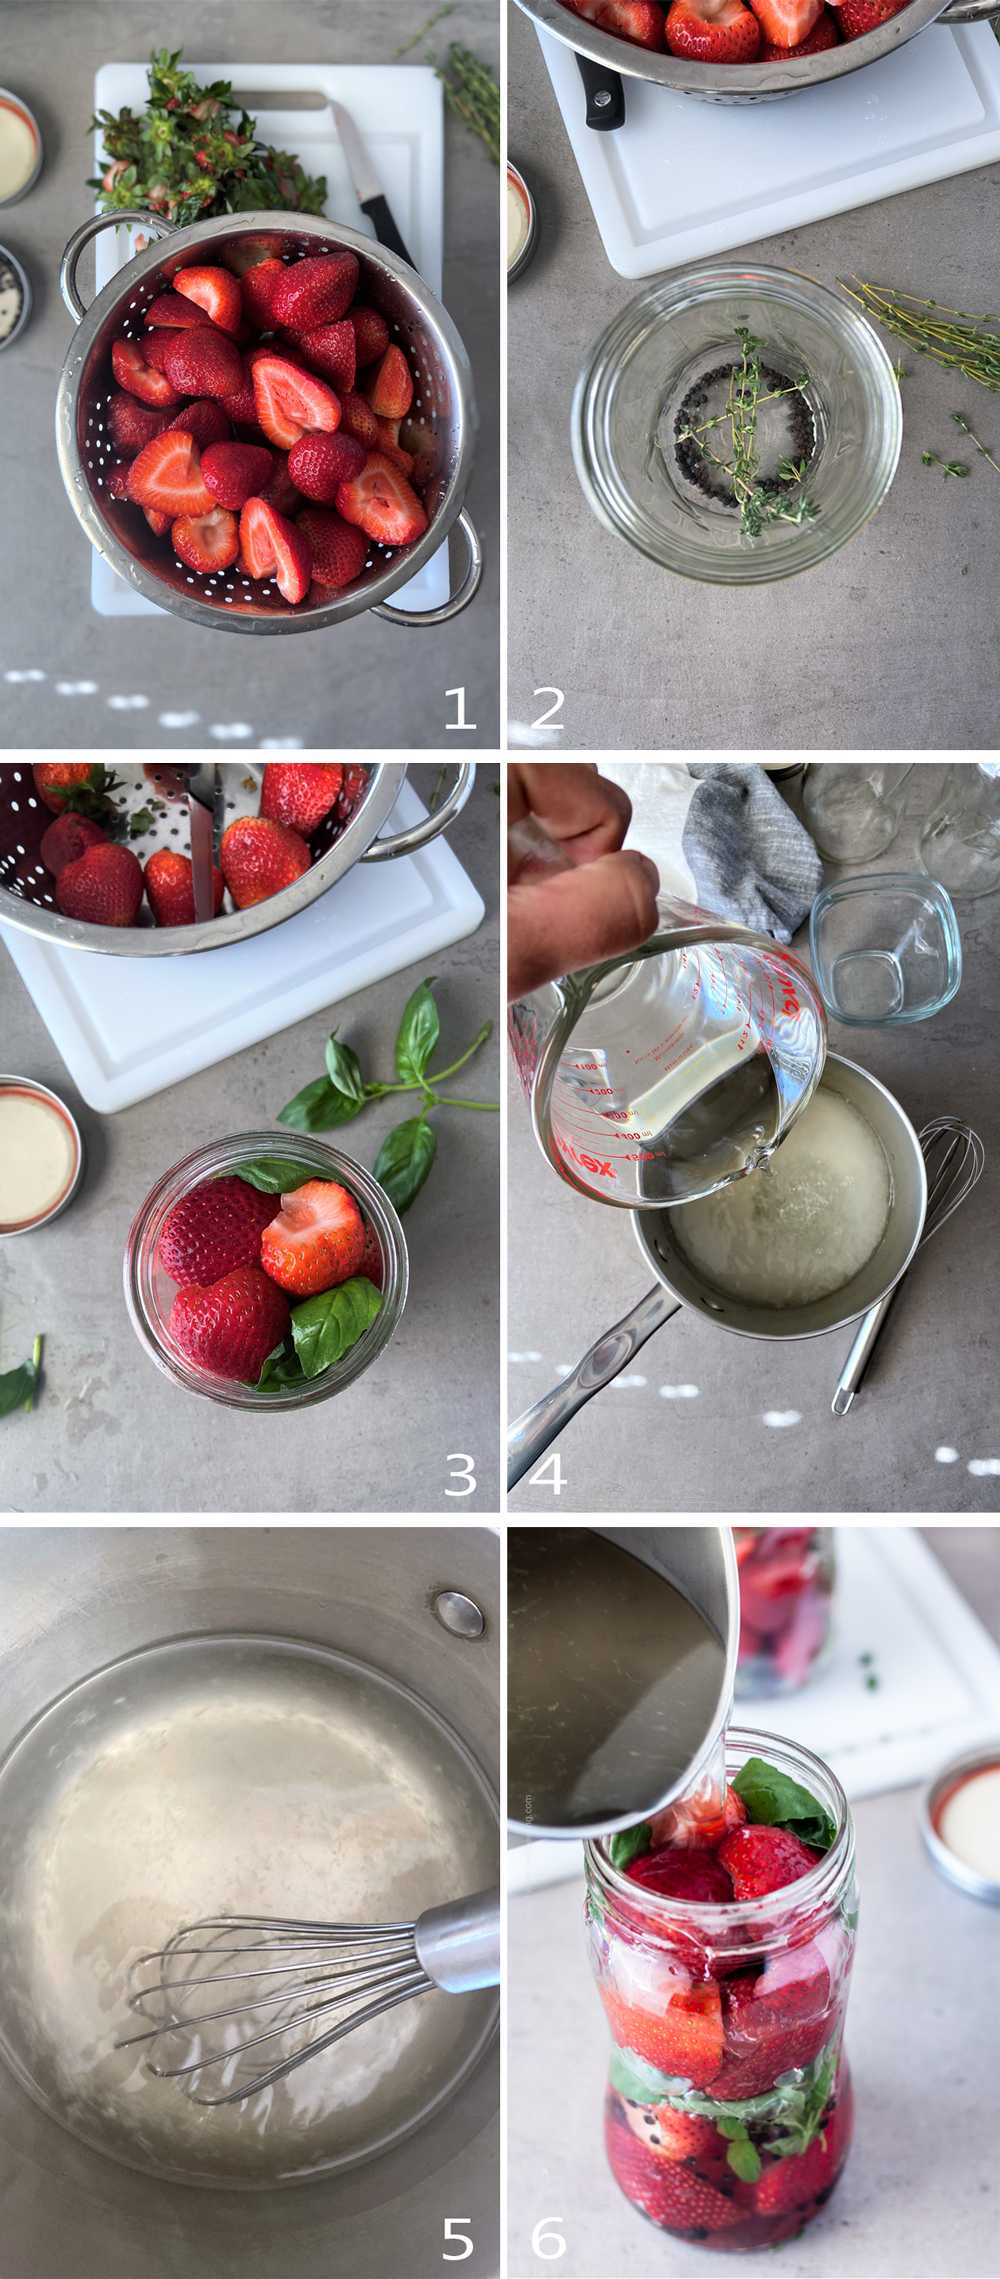 How to pickle strawberries - process image grid.